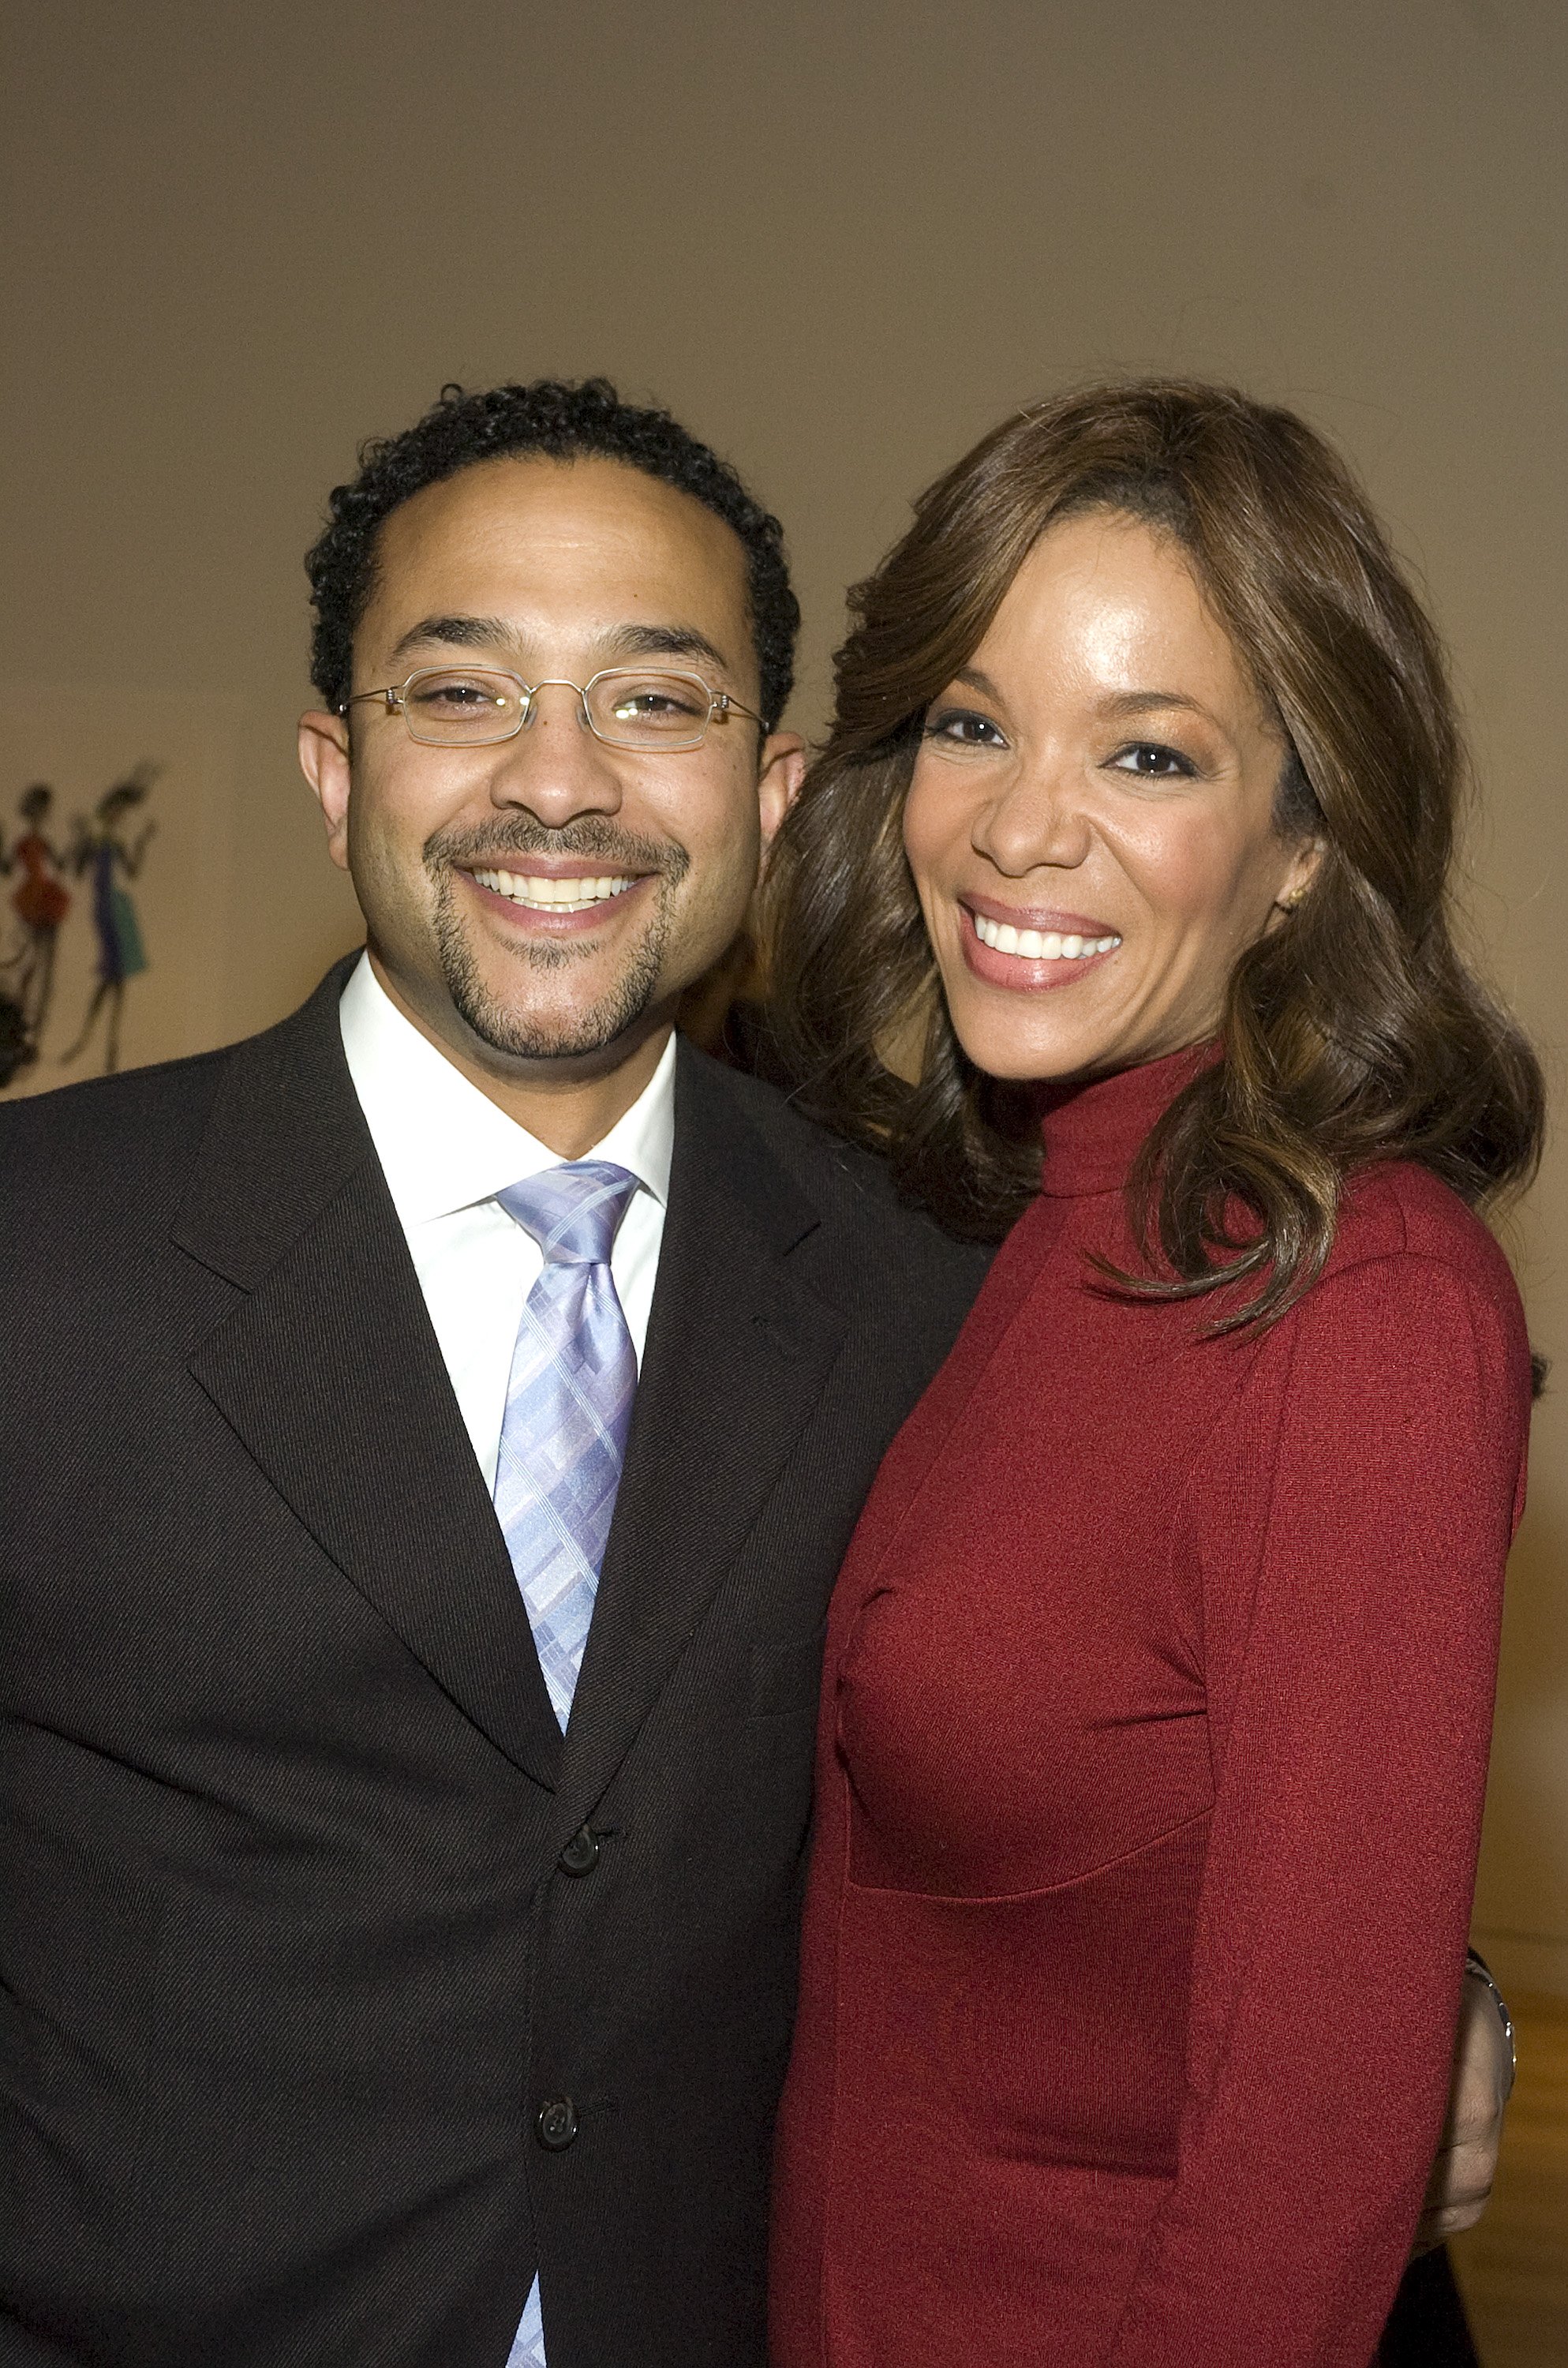 Emannuel Hostin and Sunny Hostin at an Auction hosted at Sotheby's in New York City on December 6, 2010. | Source: Getty Images